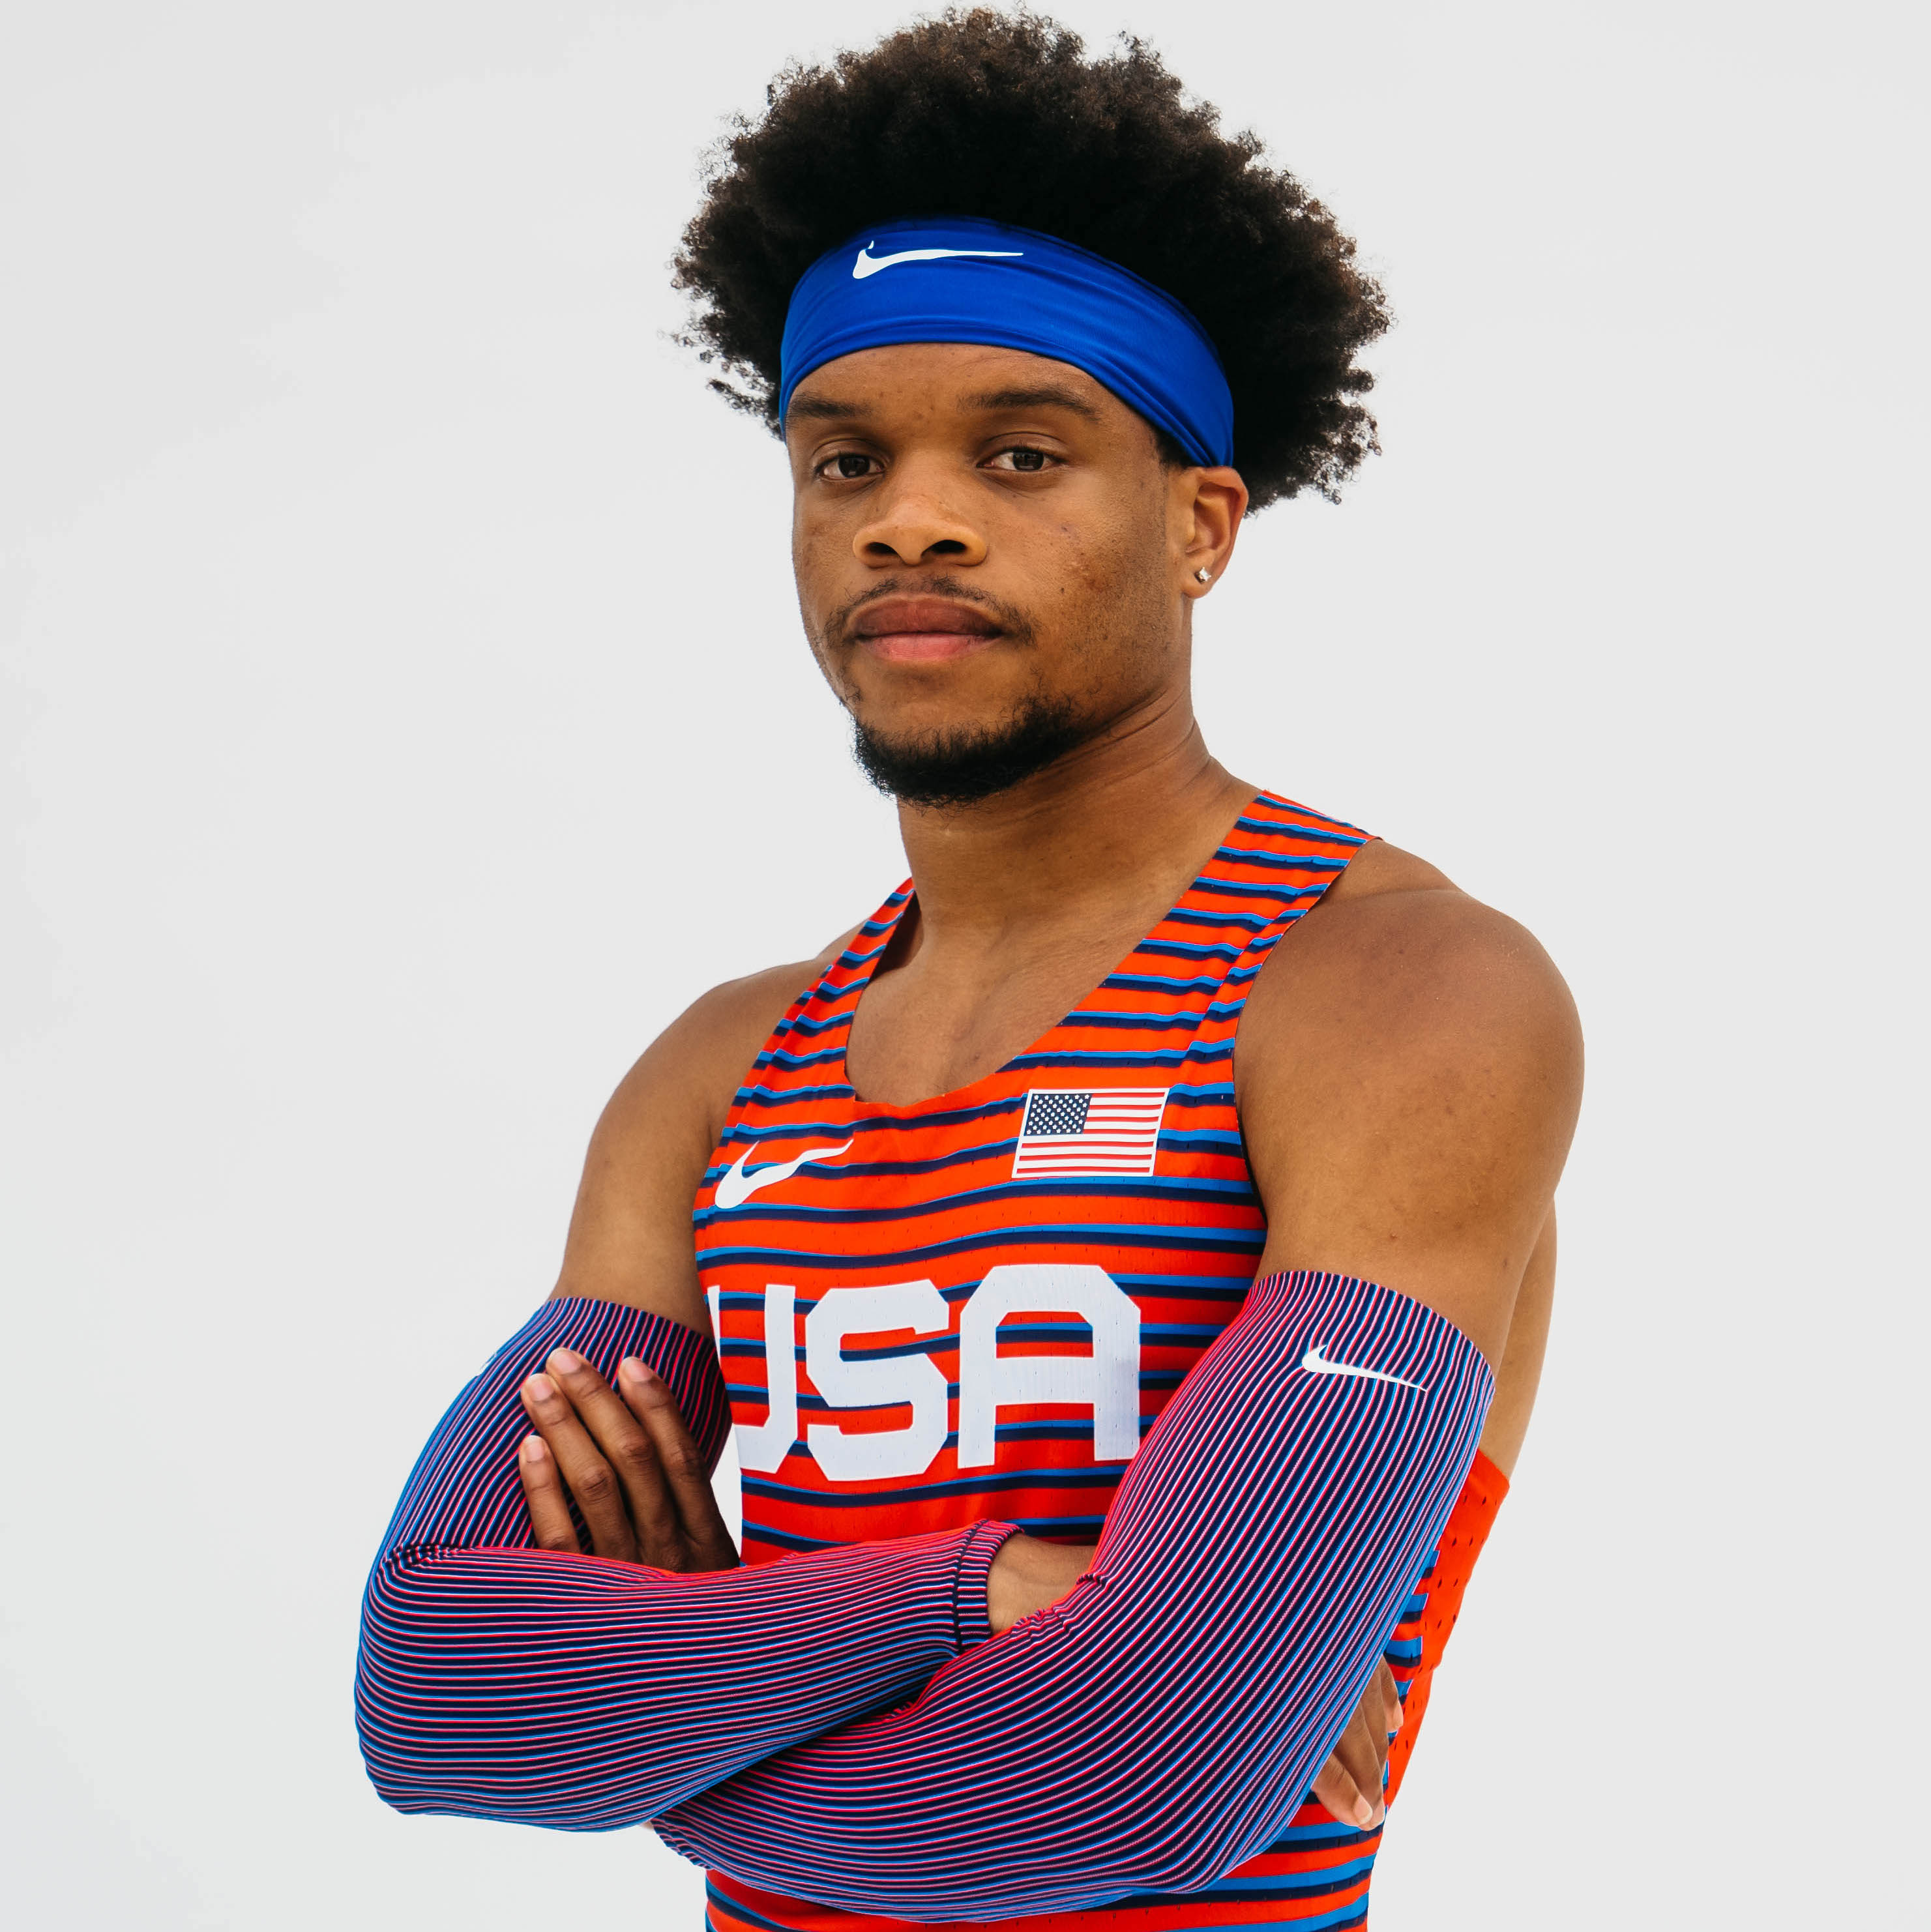 Noah in his Team USA uniform with his arms crossed.